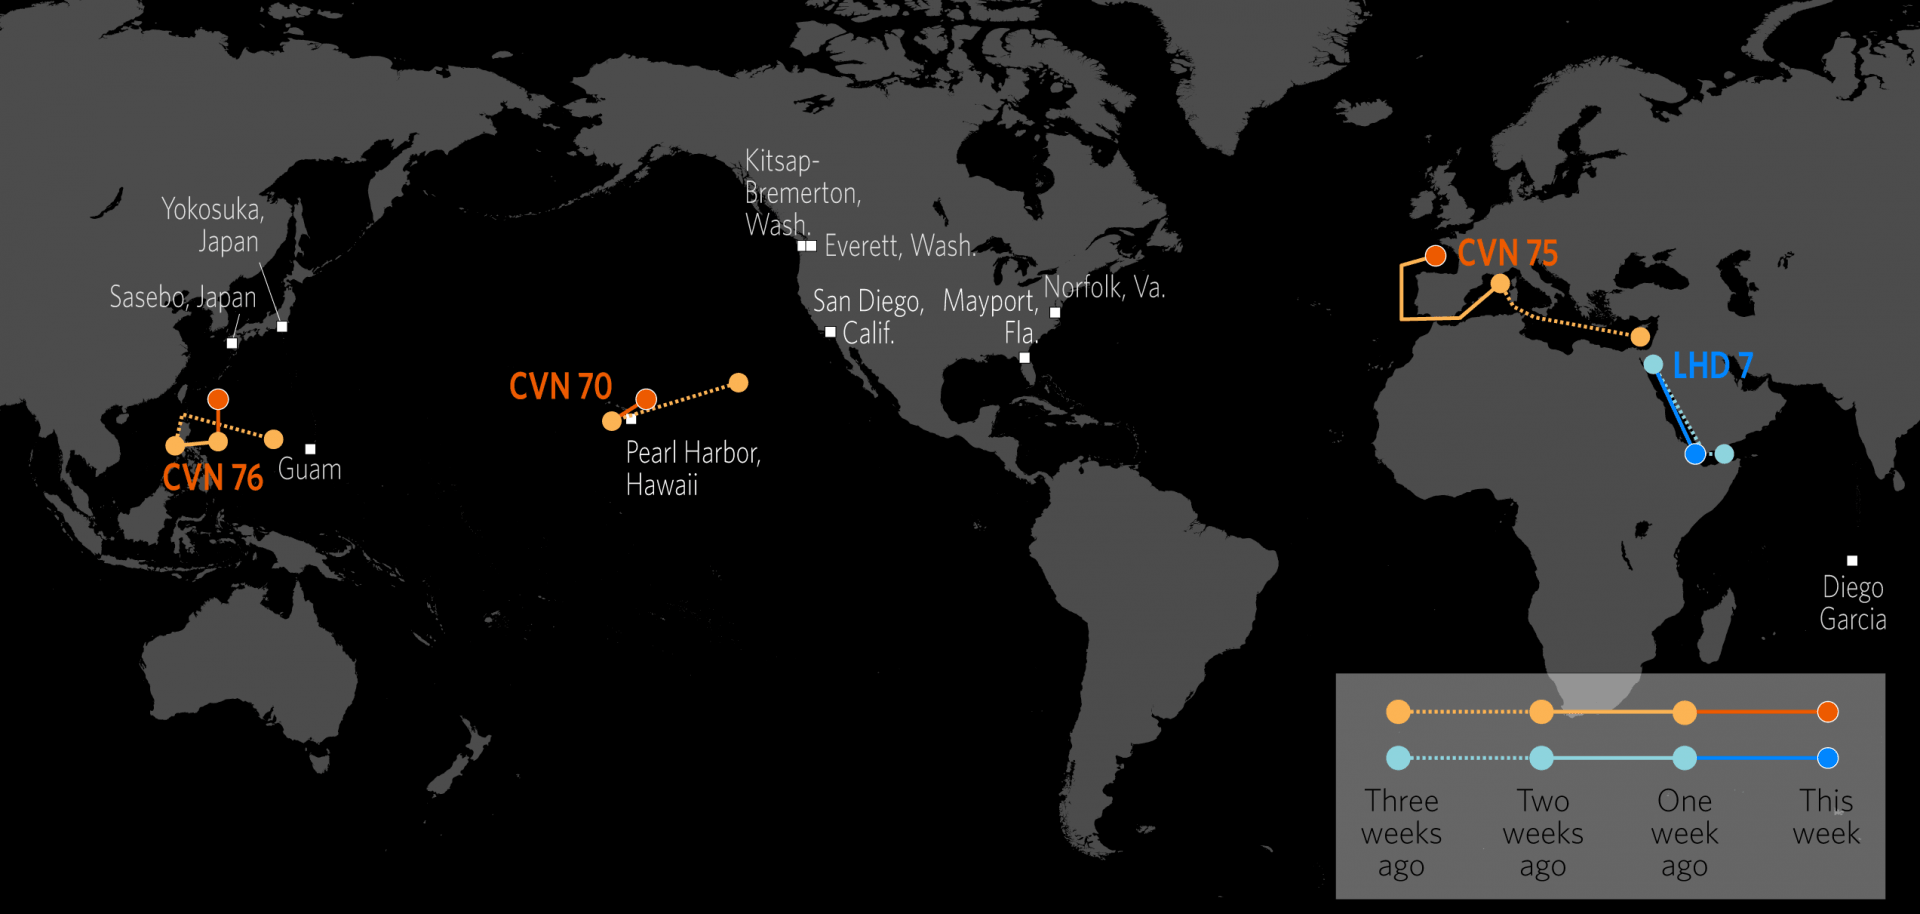 Naval Update Map: July 12, 2018